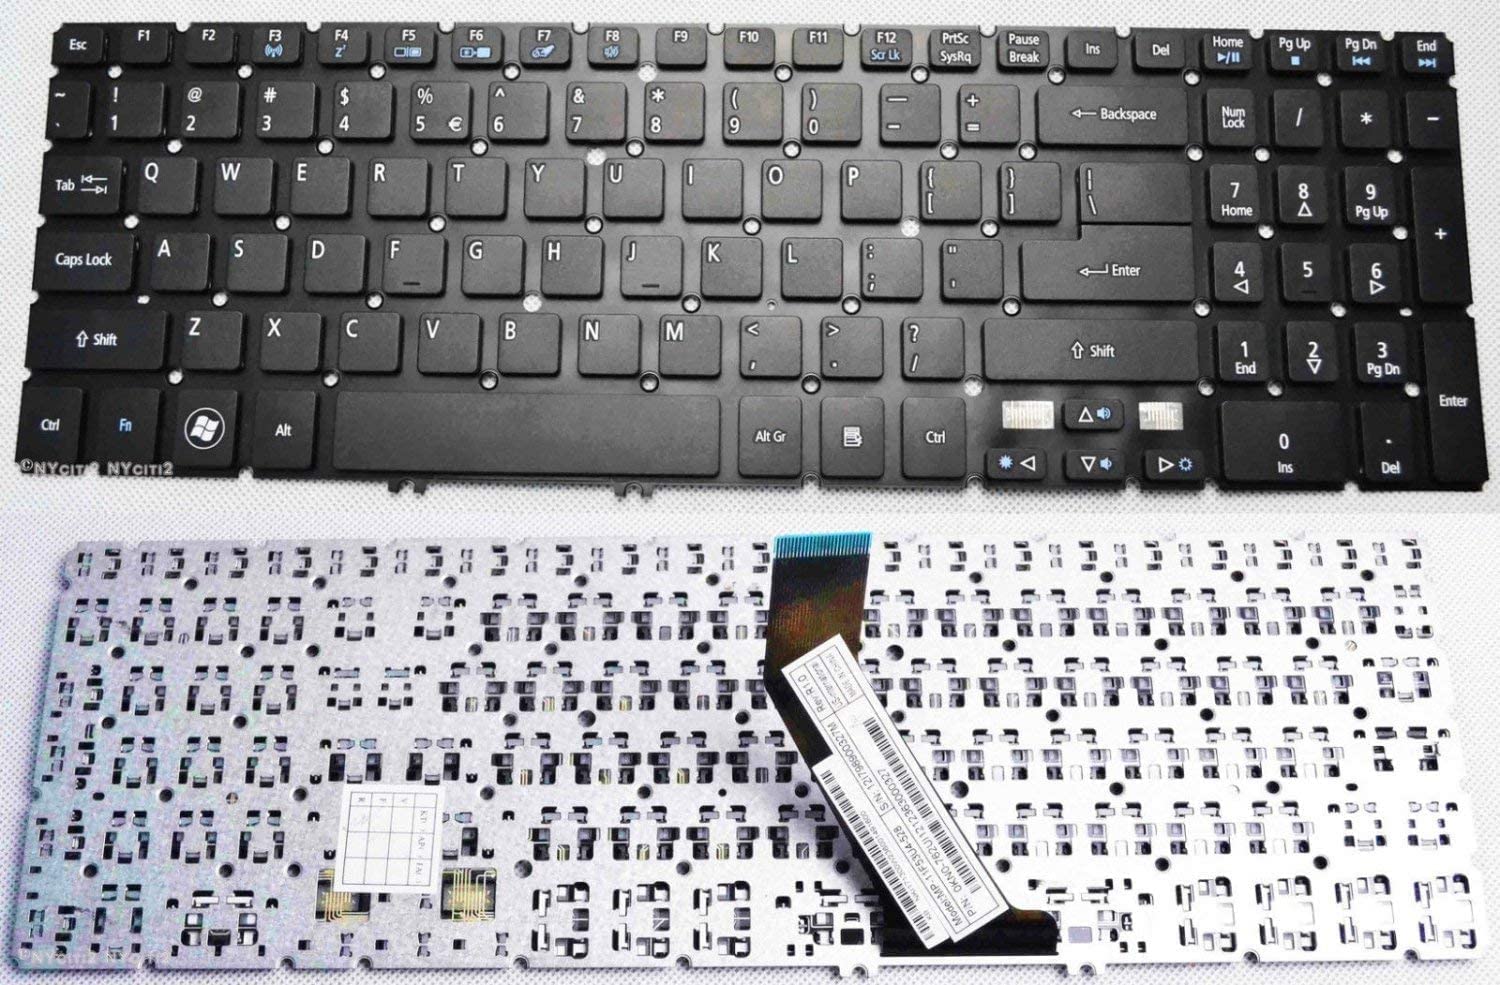 WISTAR Laptop Keyboard Compatible for  Acer Aspire V5 V5-531 V5-531G V5-531P V5-531PG V5-551 V5-551G V5-571 V5-571P V5-571G V5-571PG M5-581G Series Laptop Black US Layout